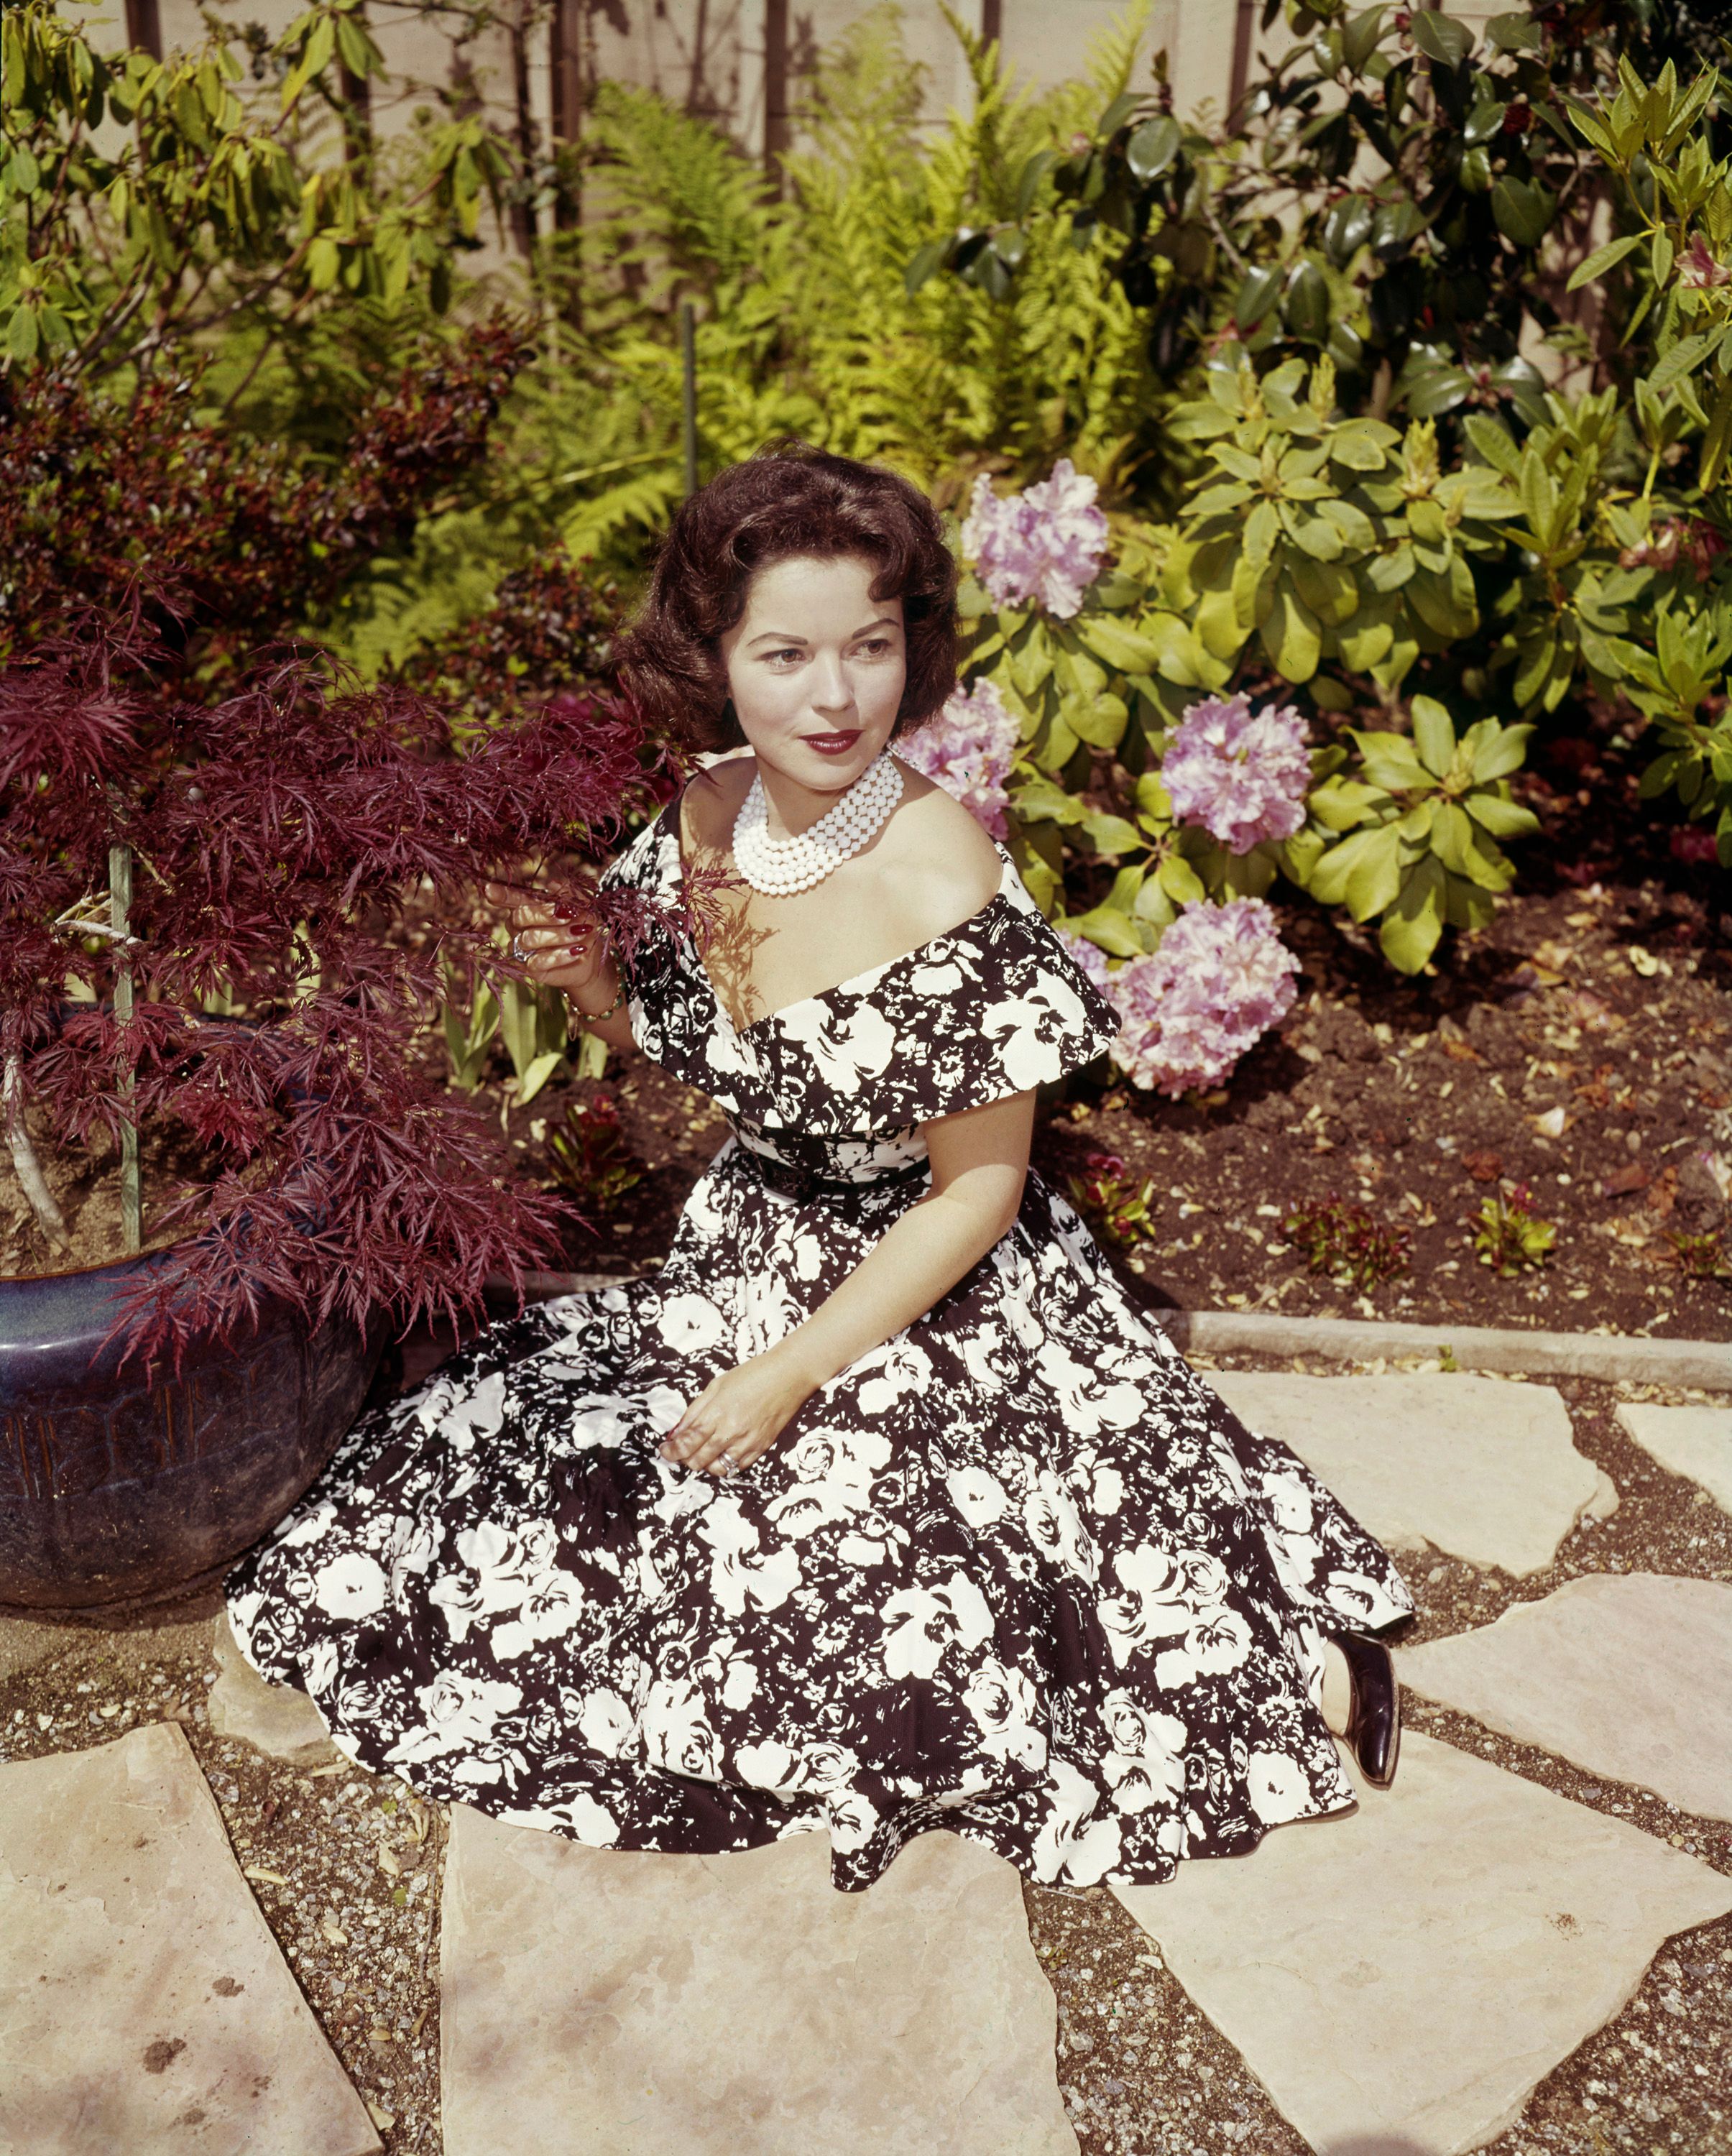 L'actrice Shirley Temple. | Photo : Getty Images